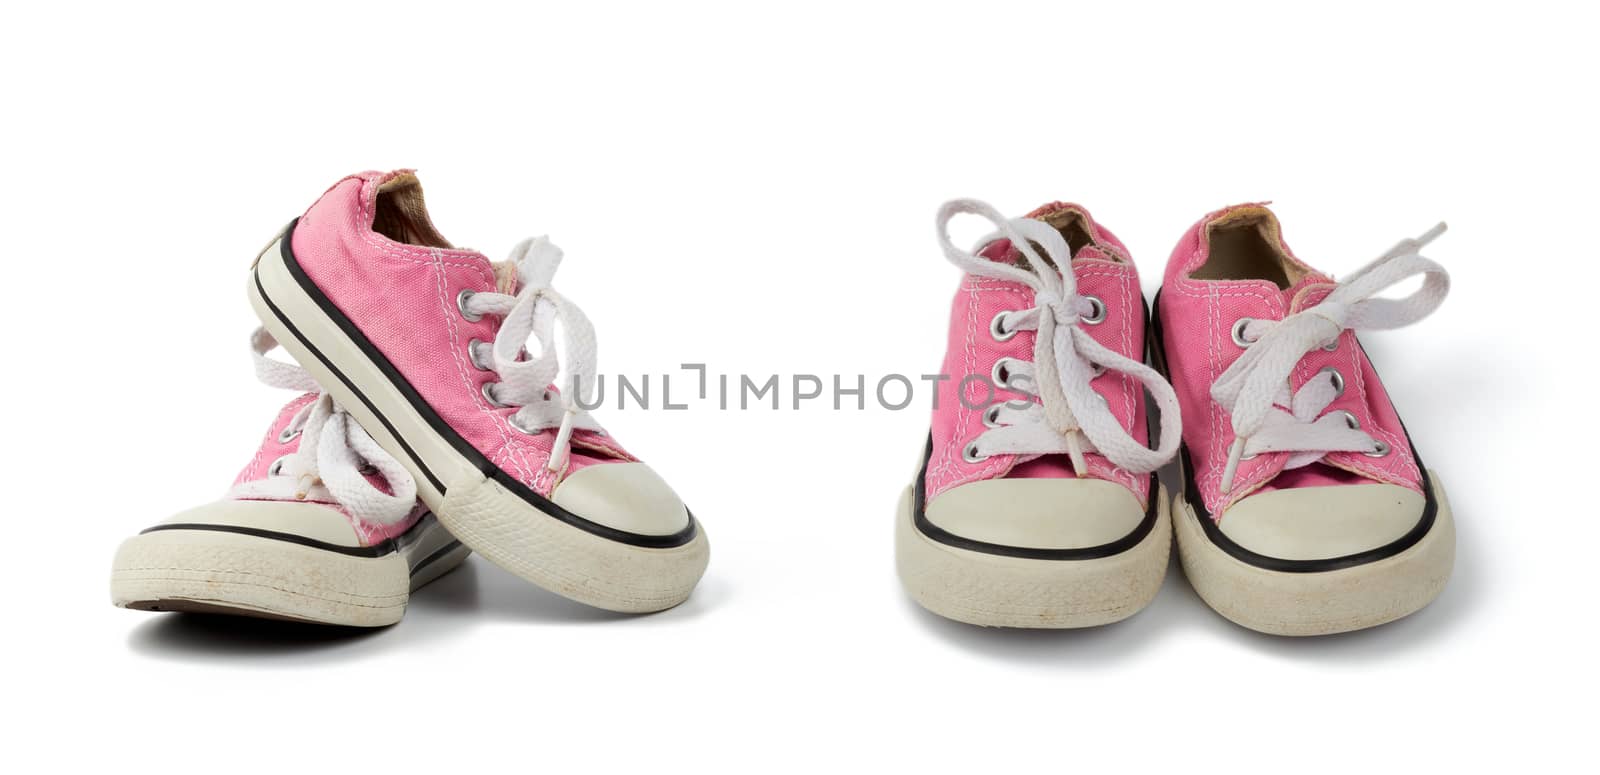 pair of pink children's textile sneakers with white laces isolat by ndanko